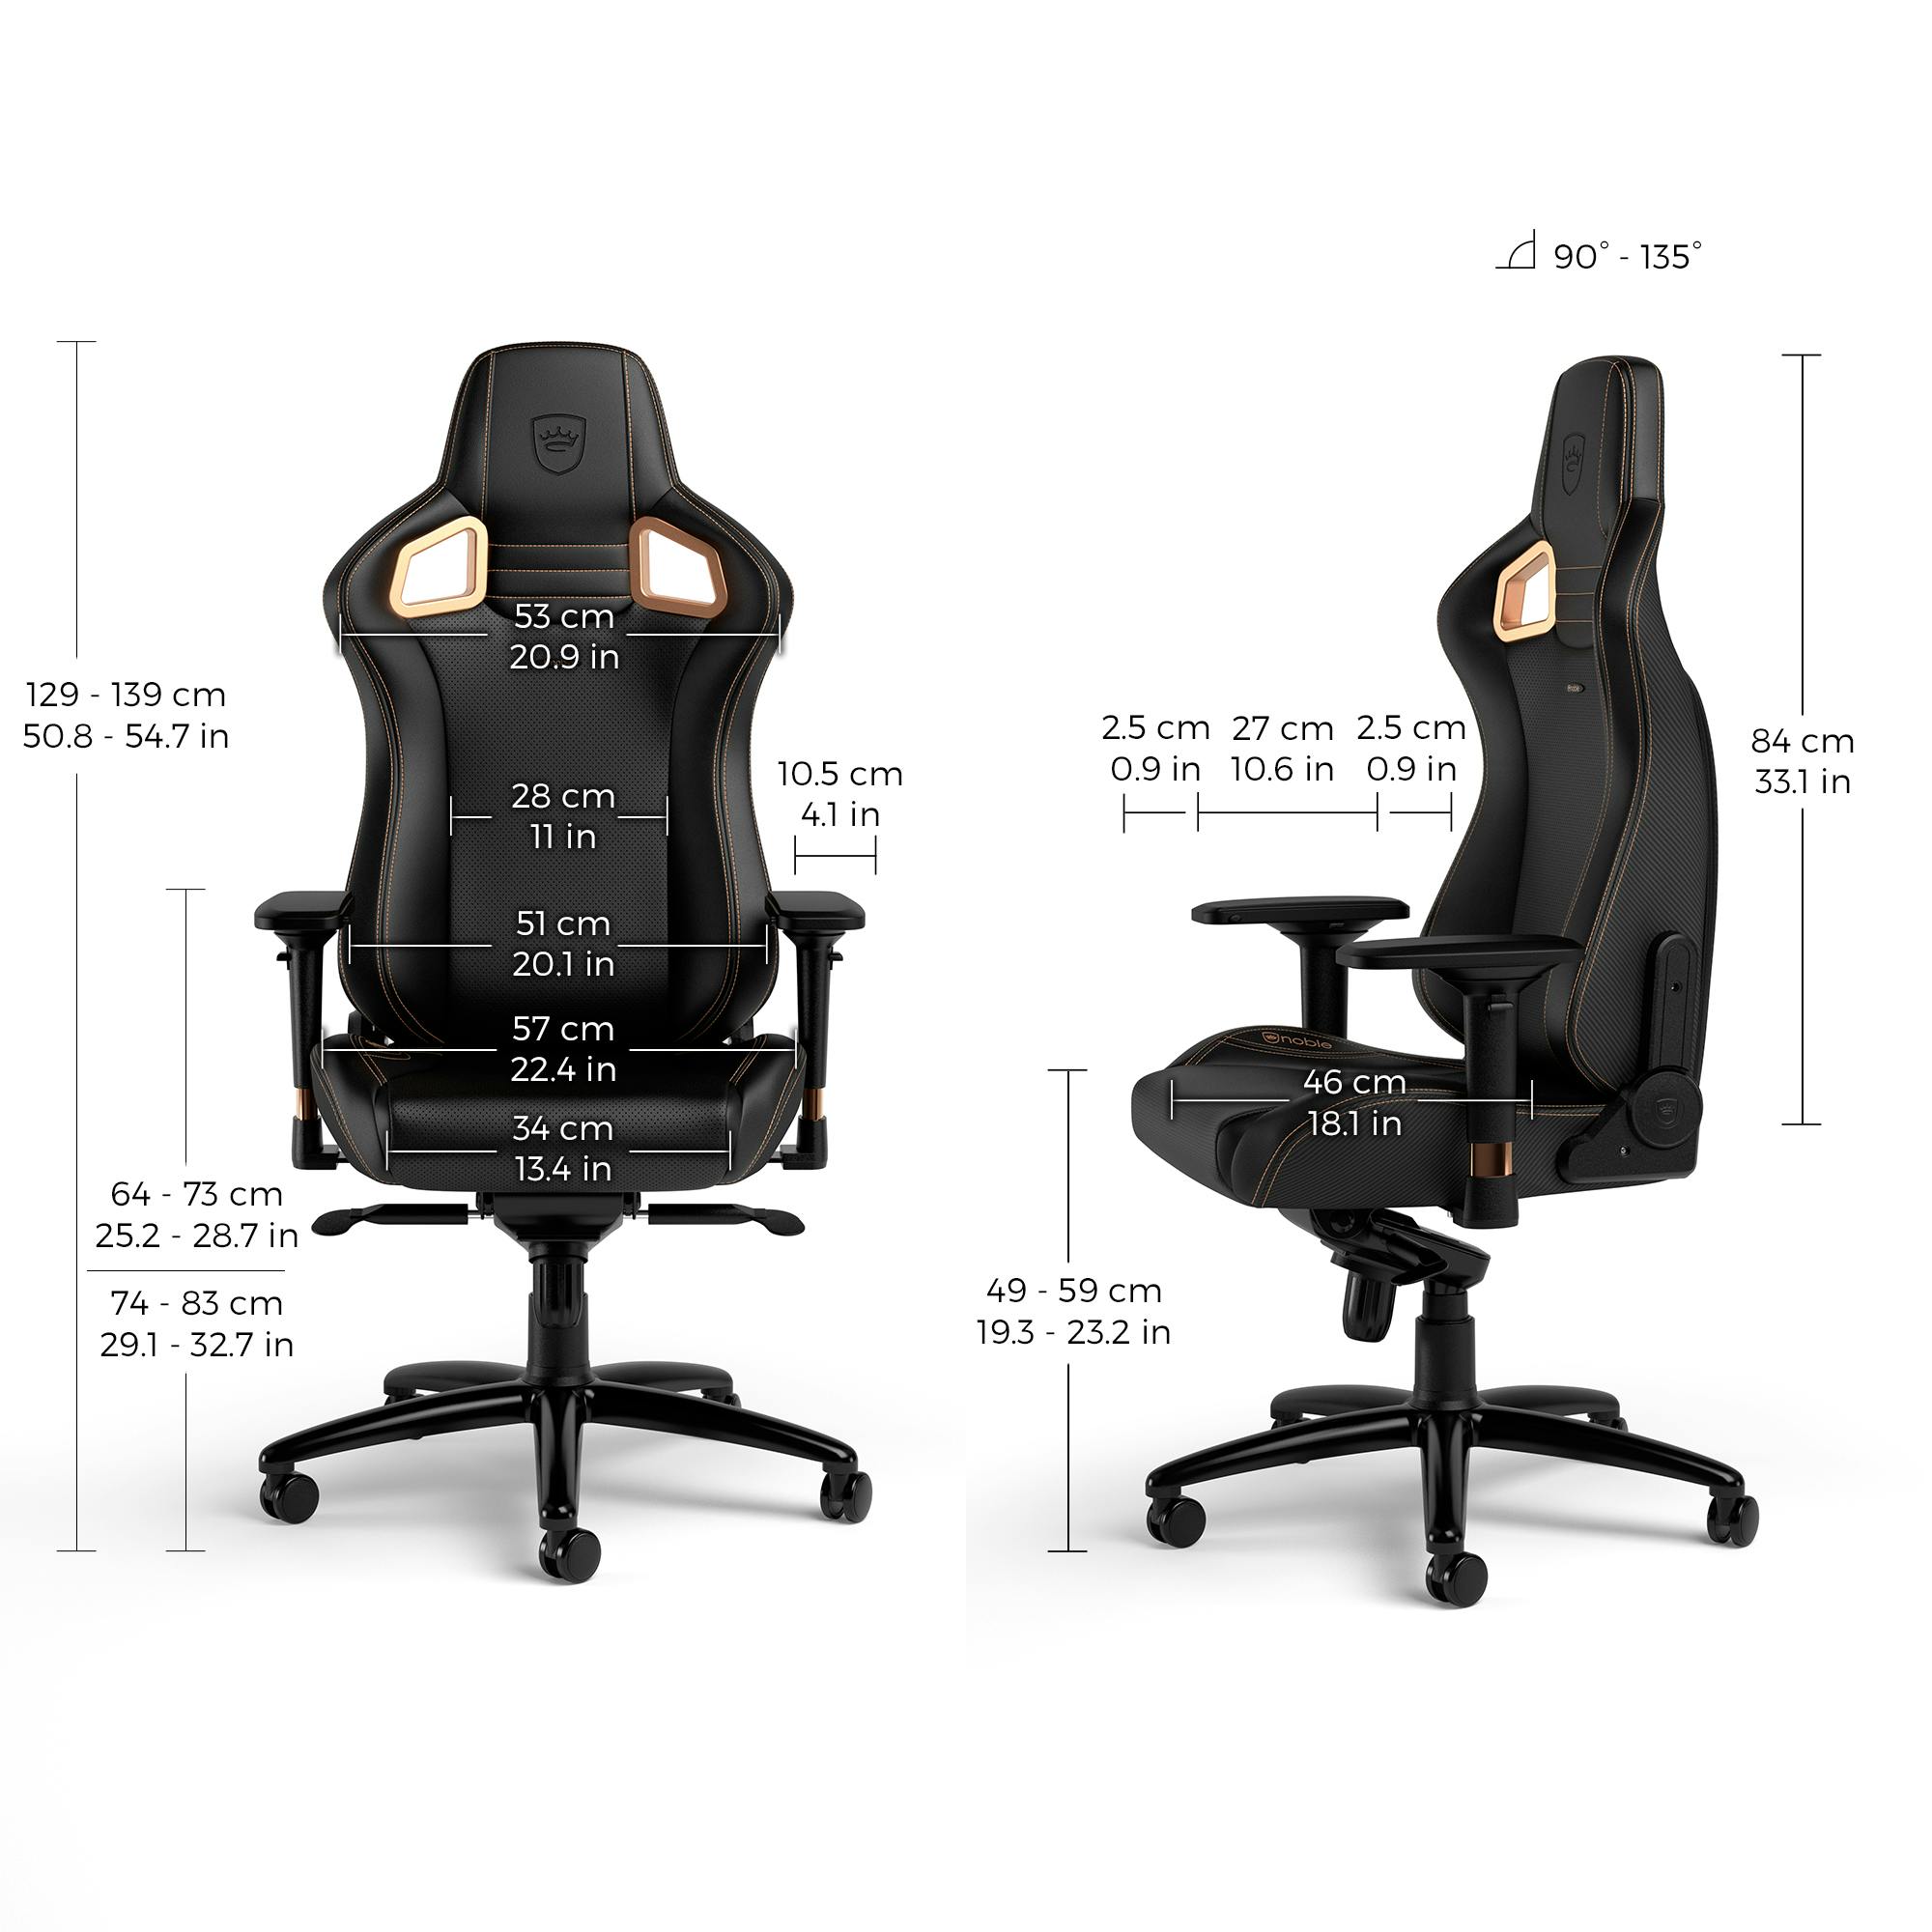 Noblechairs - EPIC Copper Limited Edition